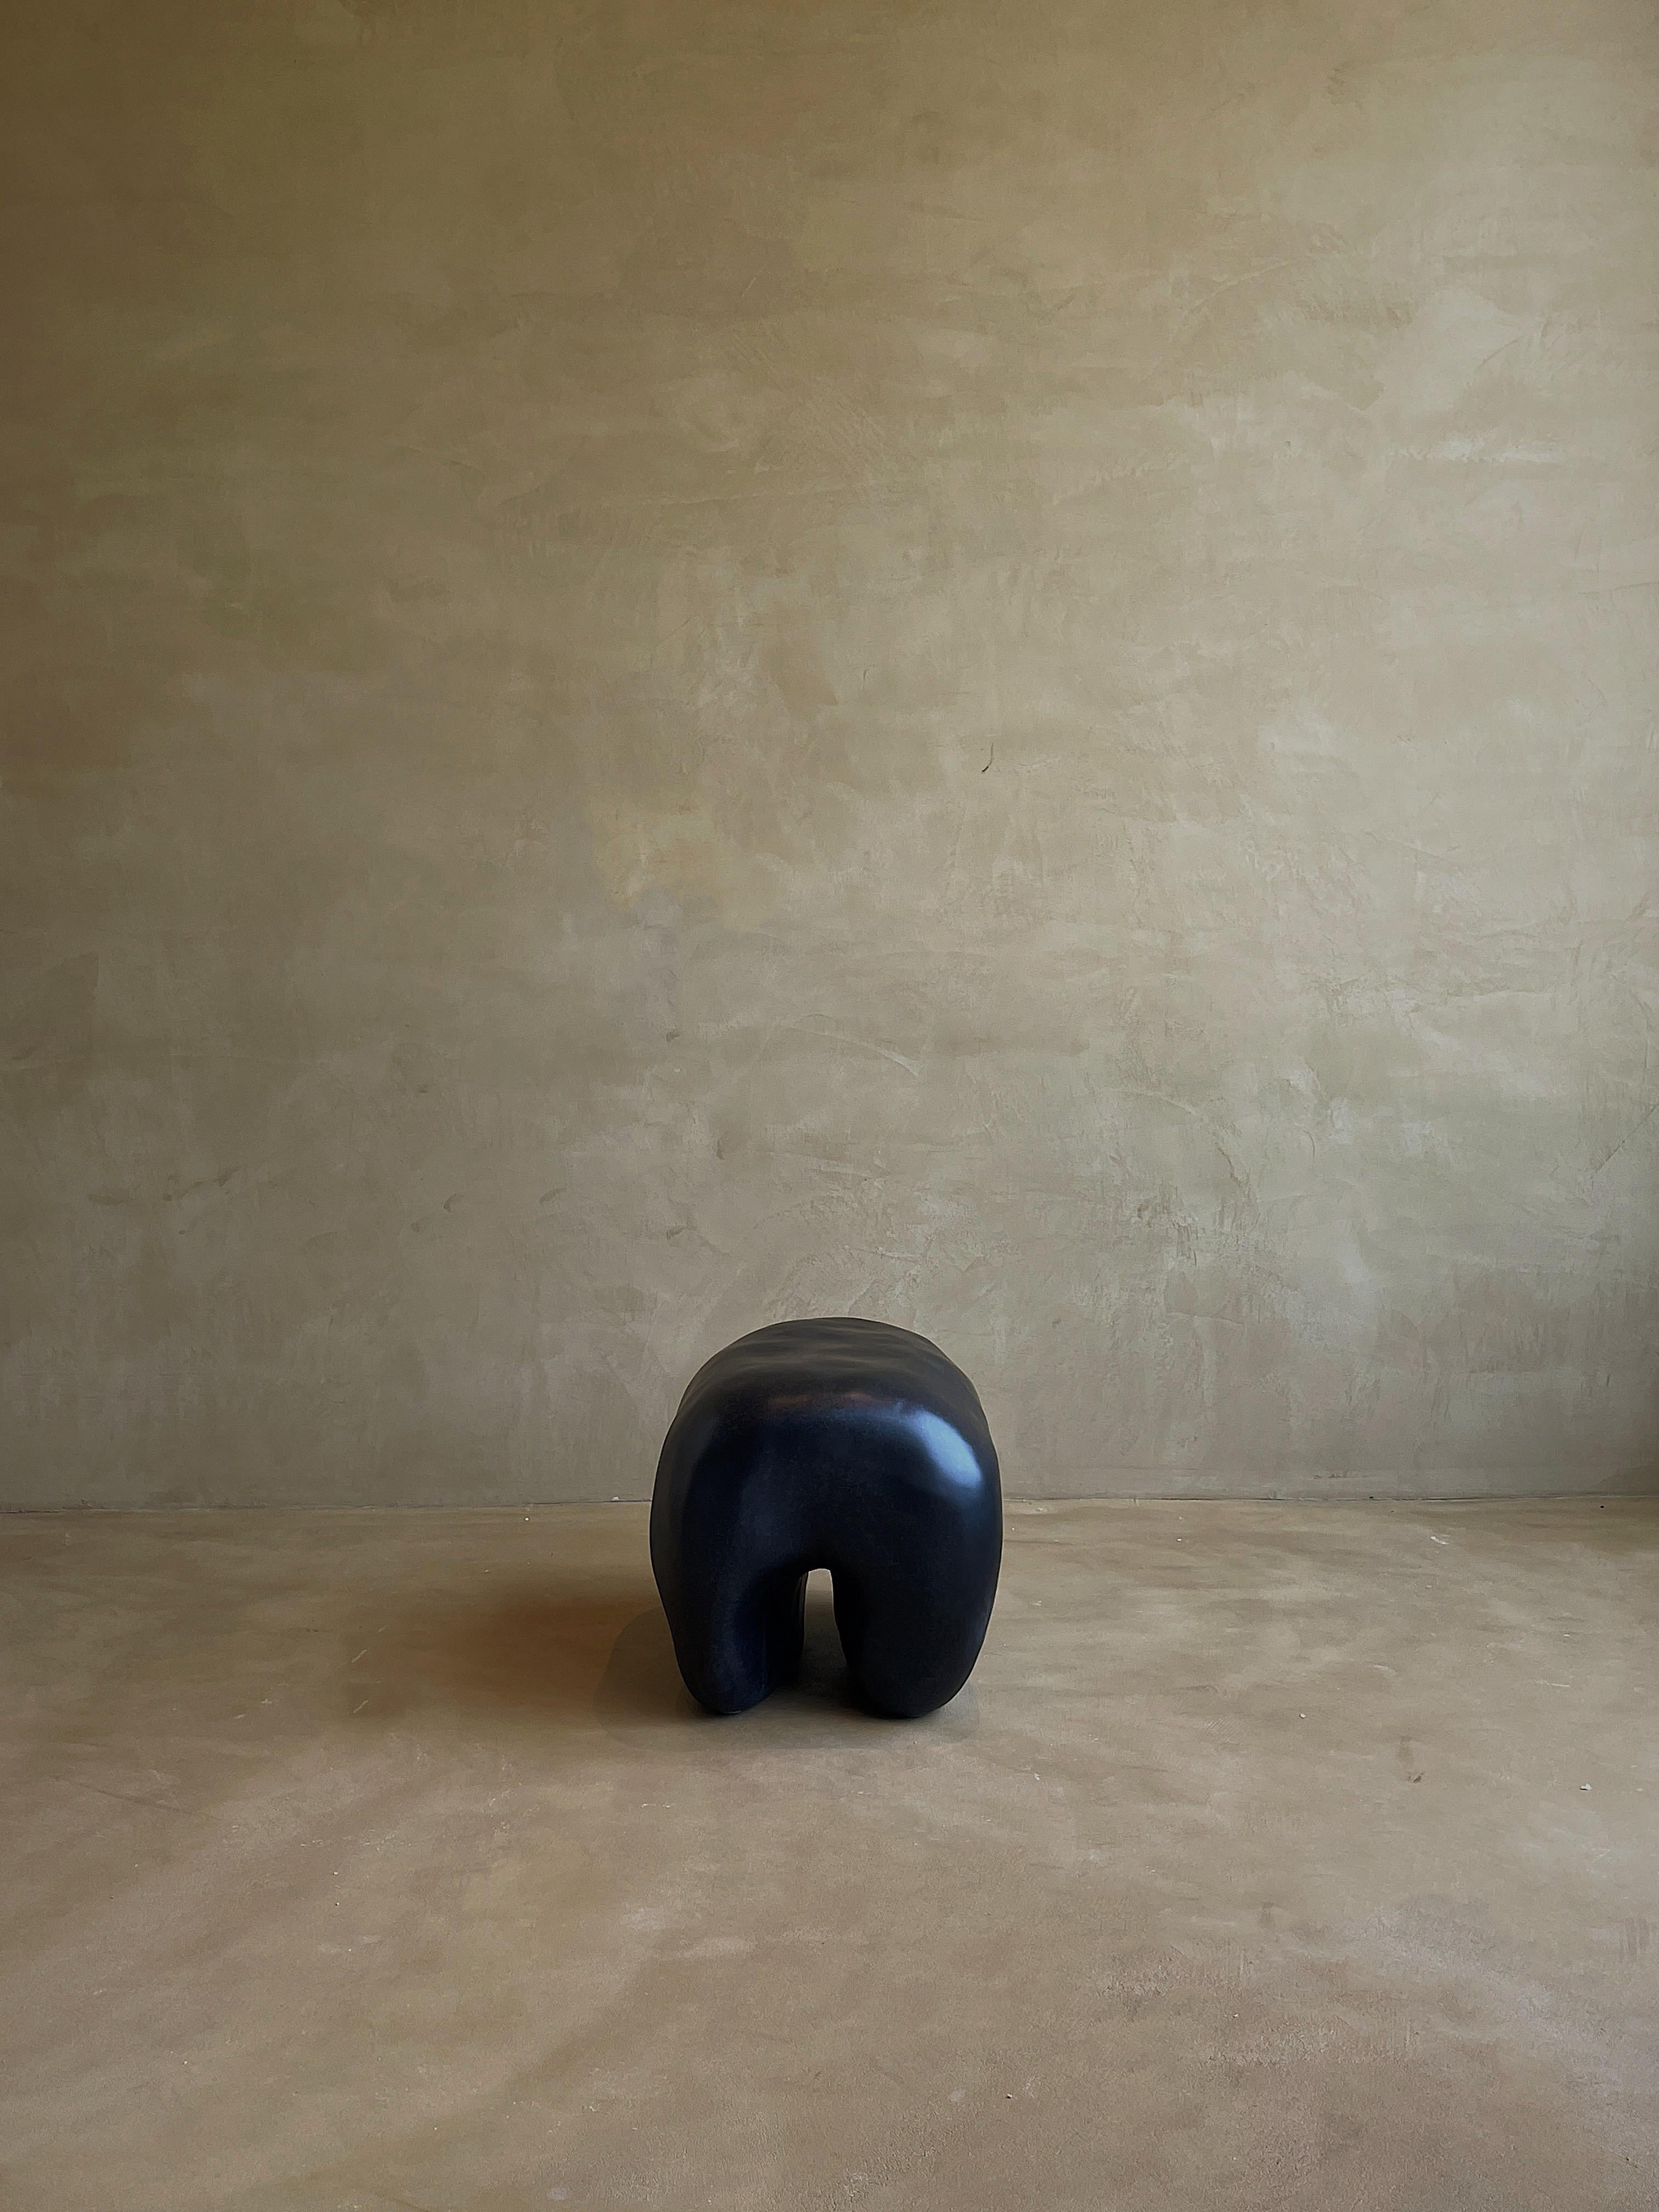 Tooth stool by Karstudio
Dimensions: W 60 x D 45 x H 43 cm
Materials: FRP
Available in black

Kar, is the root of Sanskrit Karma, meaning karmic repetition. We seek the cause and effect in aesthetics, inspired from the past, the present, and